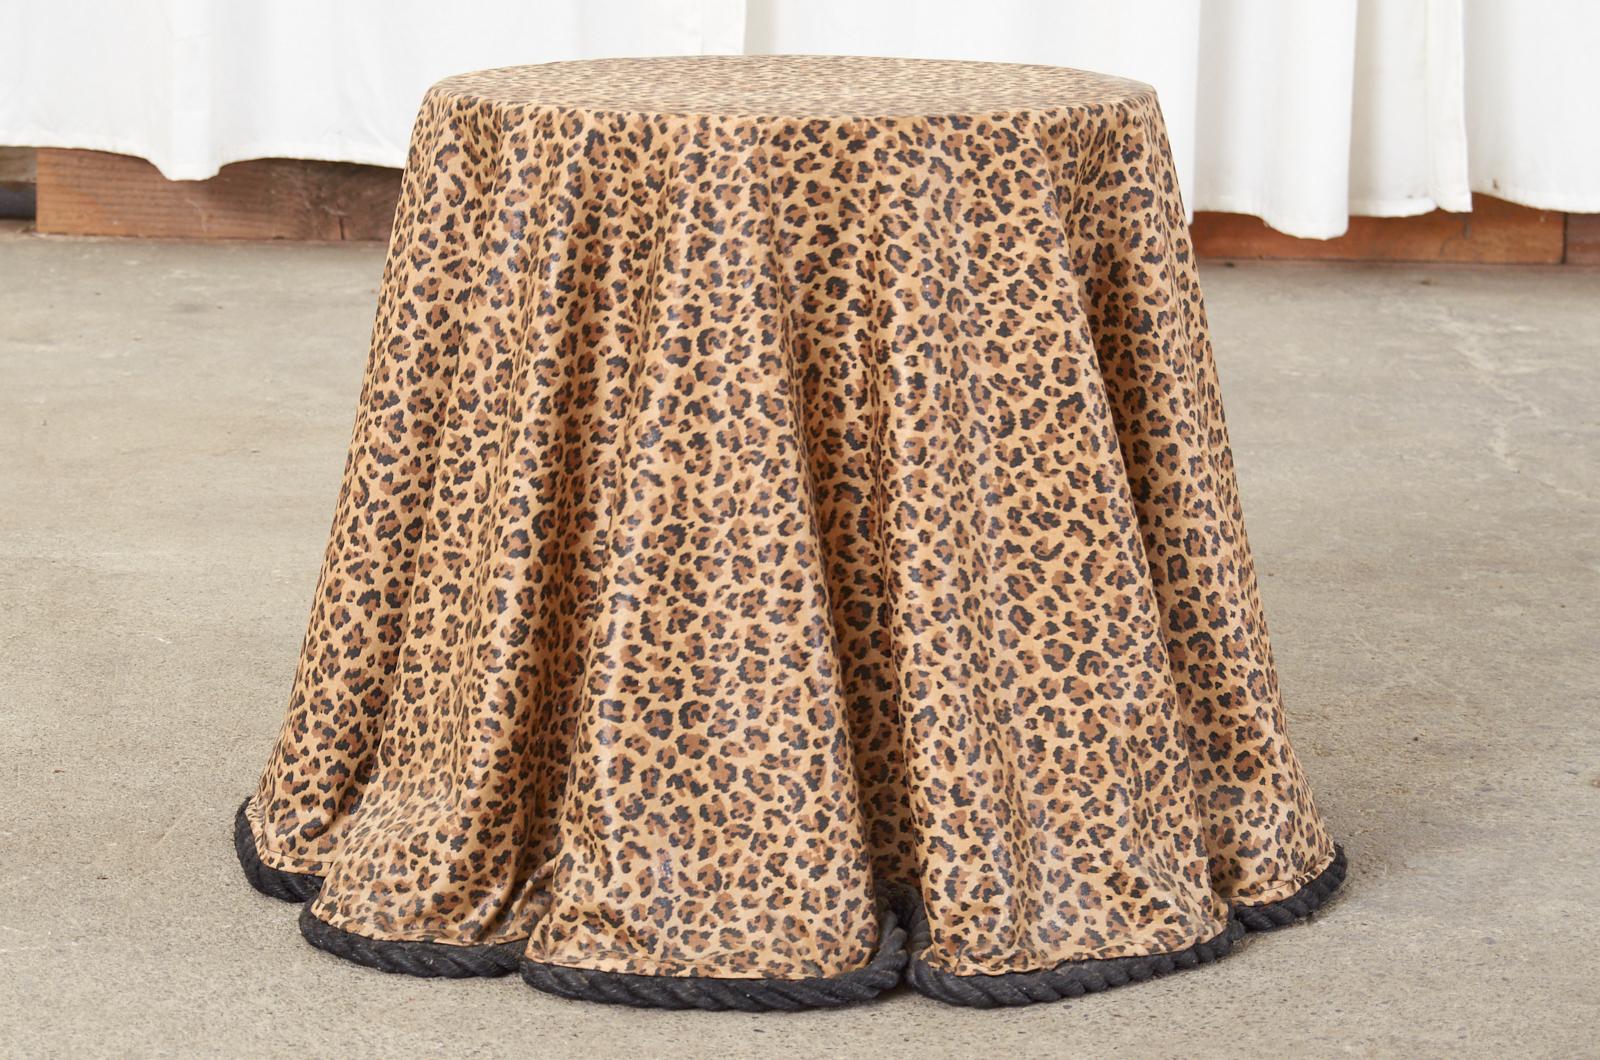 Fantastic Hollywood Regency drink table or side table featuring a trompe L'oeil draped fur cover. Handcrafted from fiberglass with a leopard, jaguar, or cheetah design and a black rope border. The fiberglass is draped over a round wood top and fans